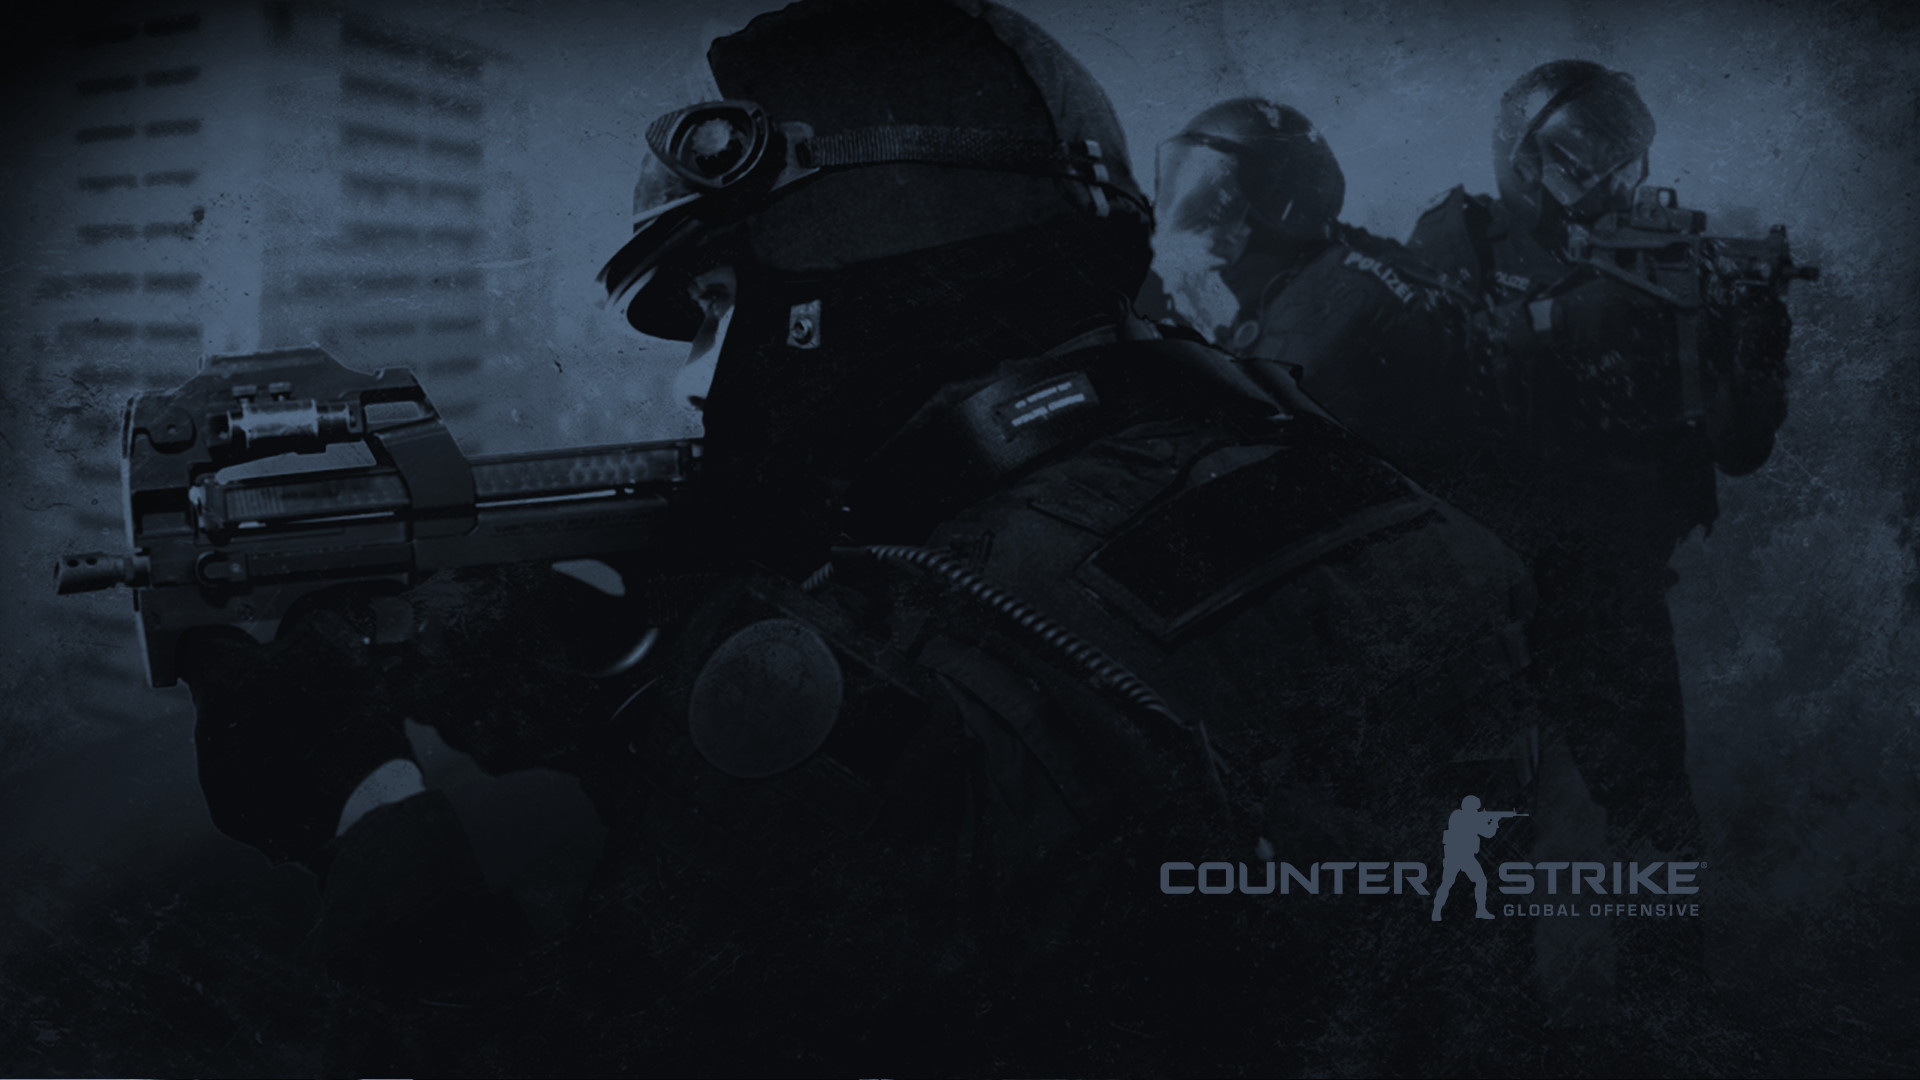 1920x1080 Counter Strike Global Offensive Wallpapers High Quality | Download Free